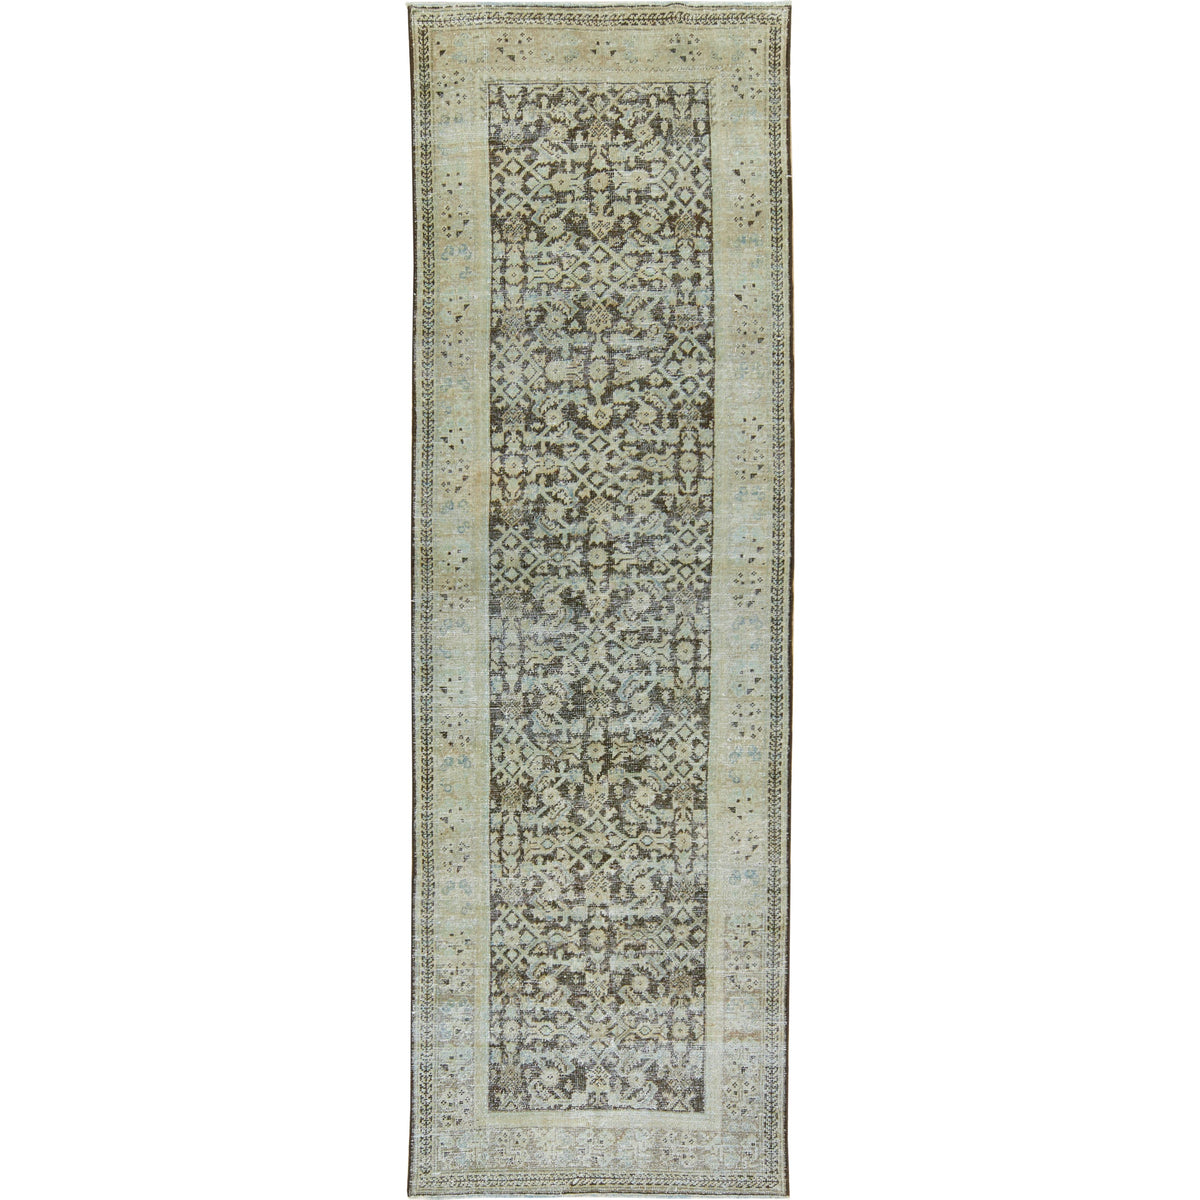 Serena - The Brown Essence of Persian Weaves | Kuden Rugs